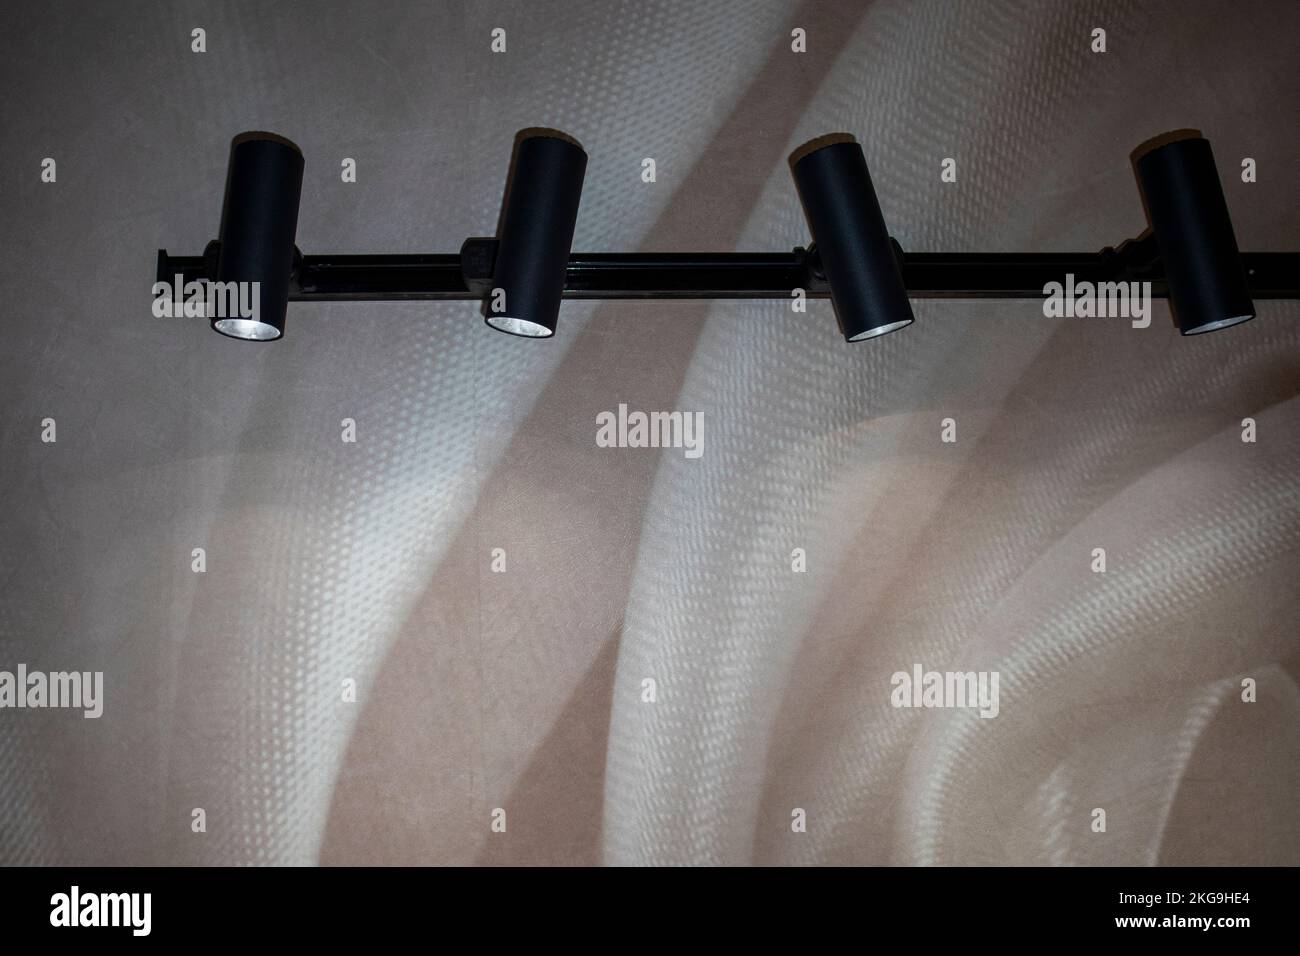 black modern lamps in the shape of a cylinder illuminate the wall Stock Photo